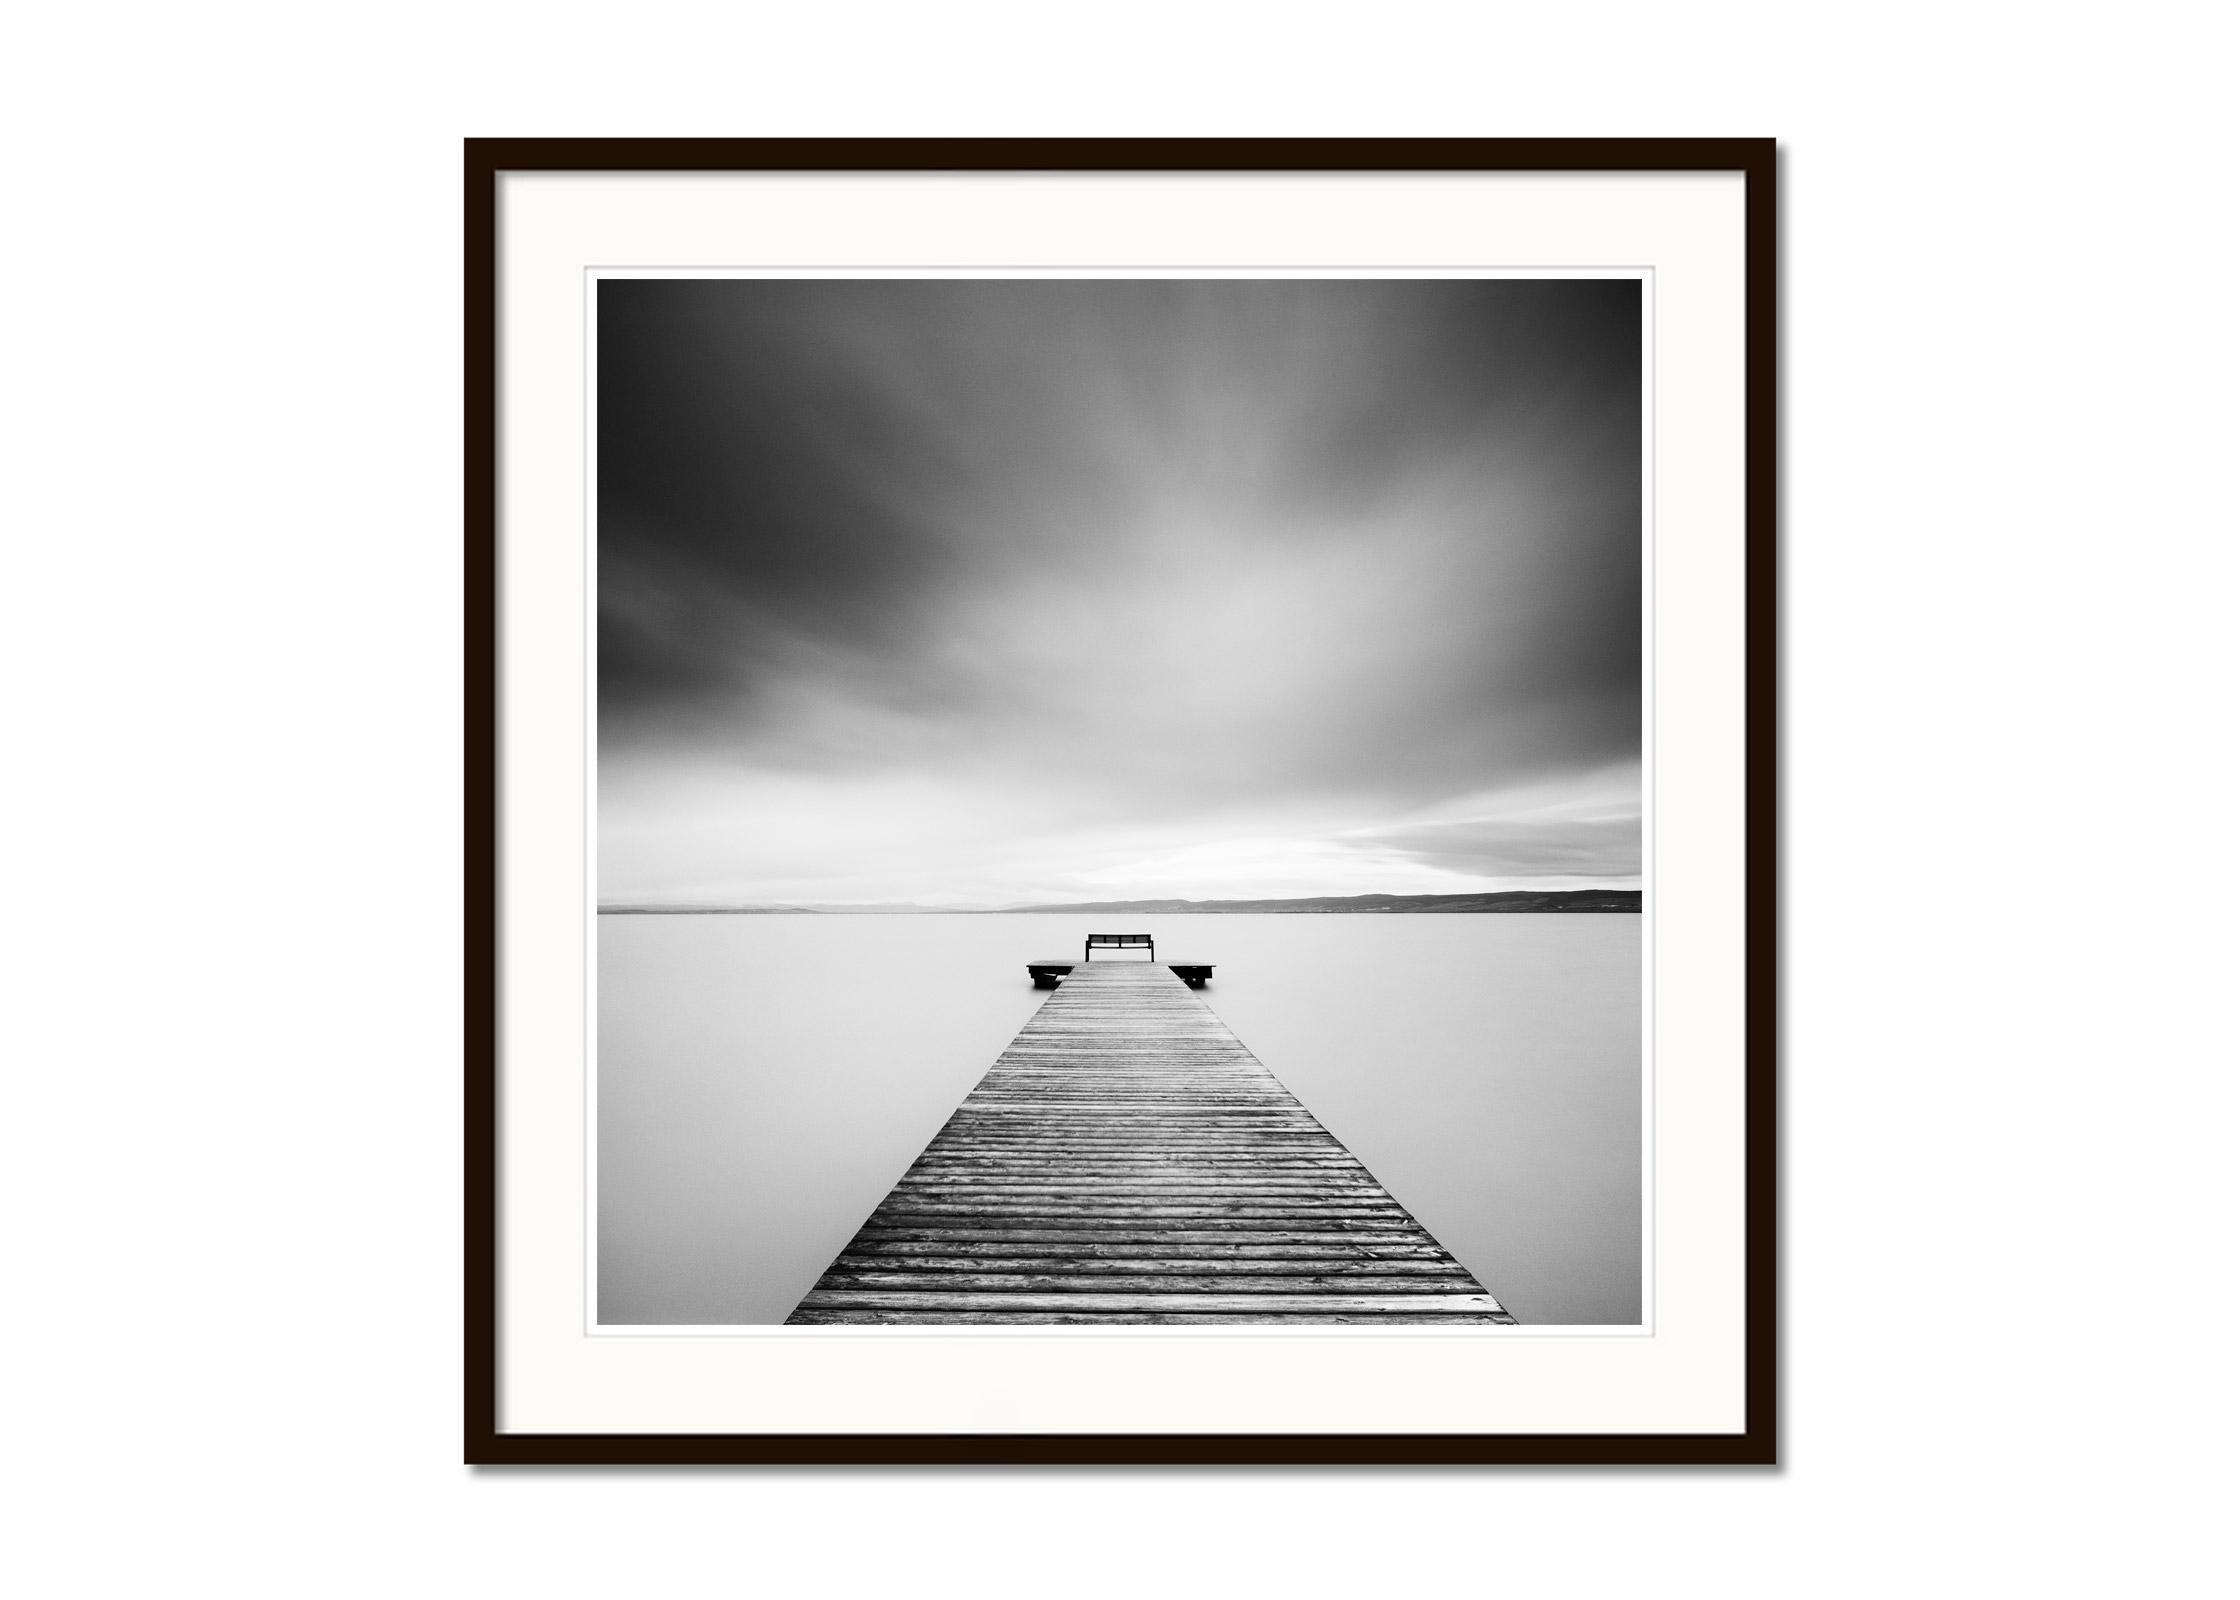 Storm Romance, Austria, Lake, black & white long exposure waterscape photography - Contemporary Photograph by Gerald Berghammer